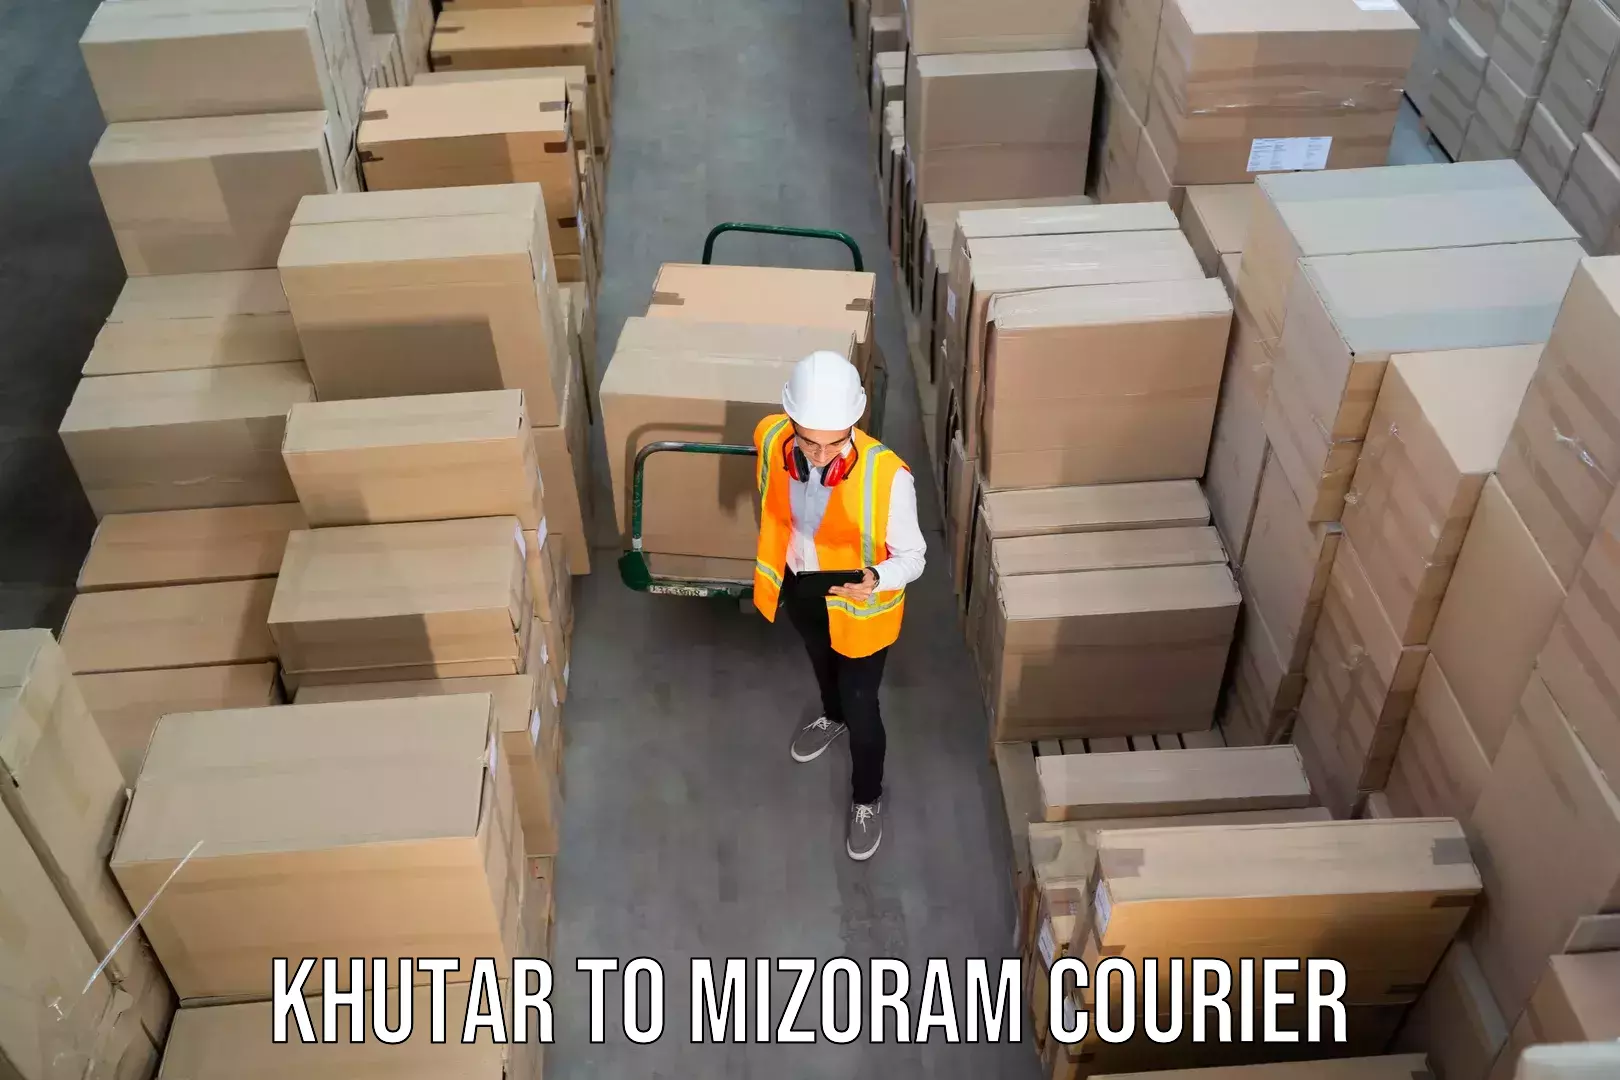 Reliable courier service Khutar to Mizoram